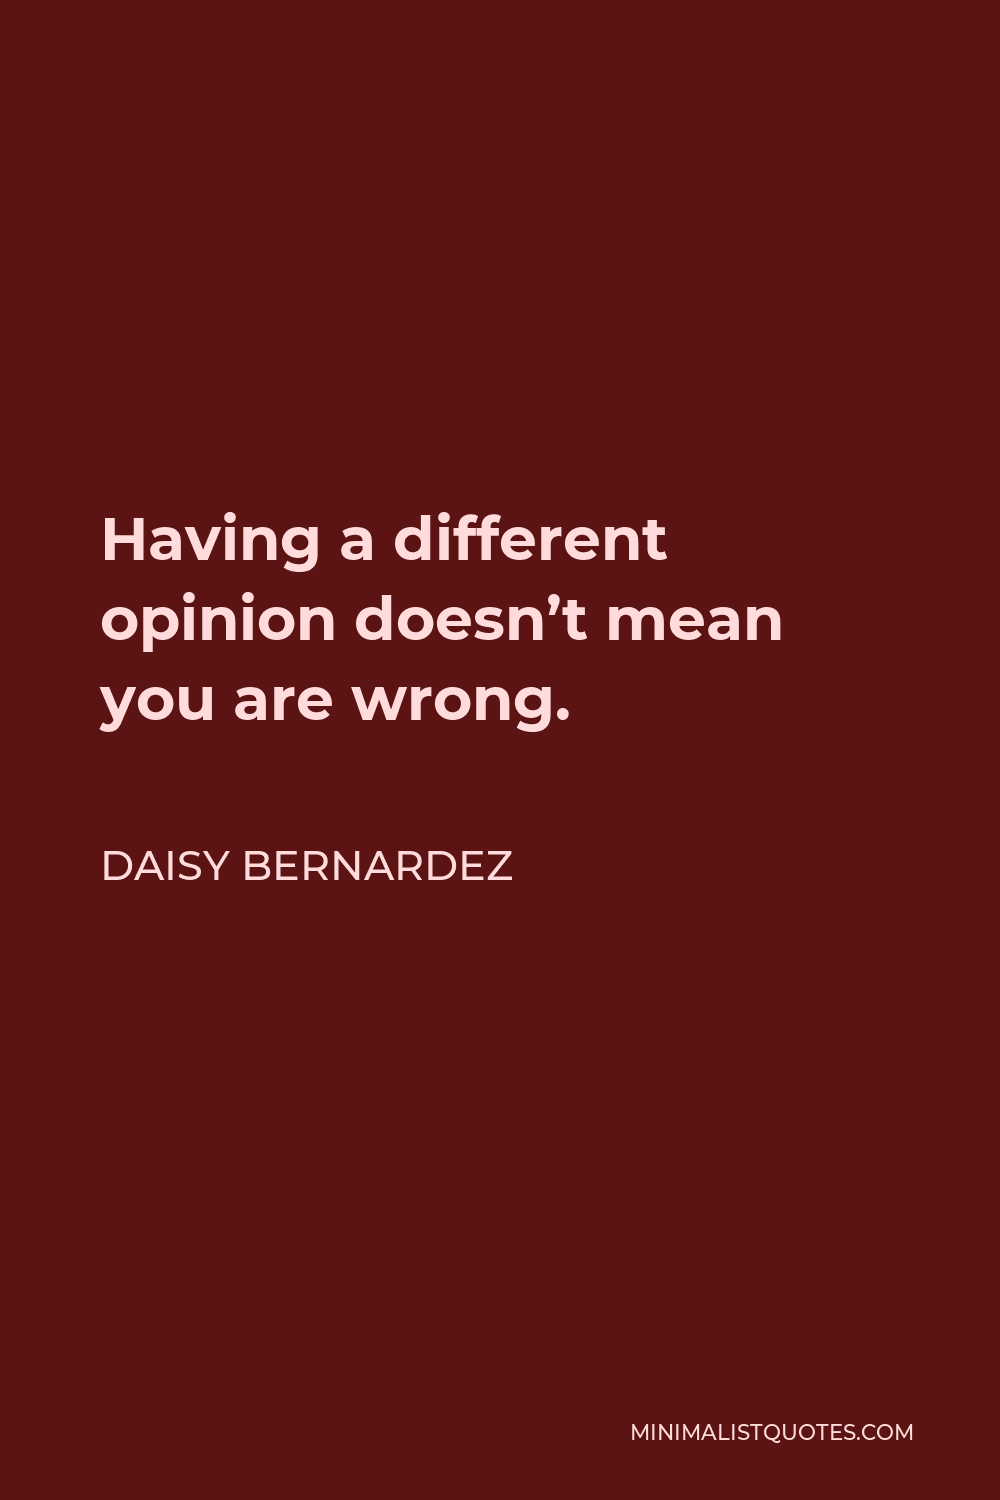 Daisy Bernardez Quote - Having a different opinion doesn’t mean you are wrong.